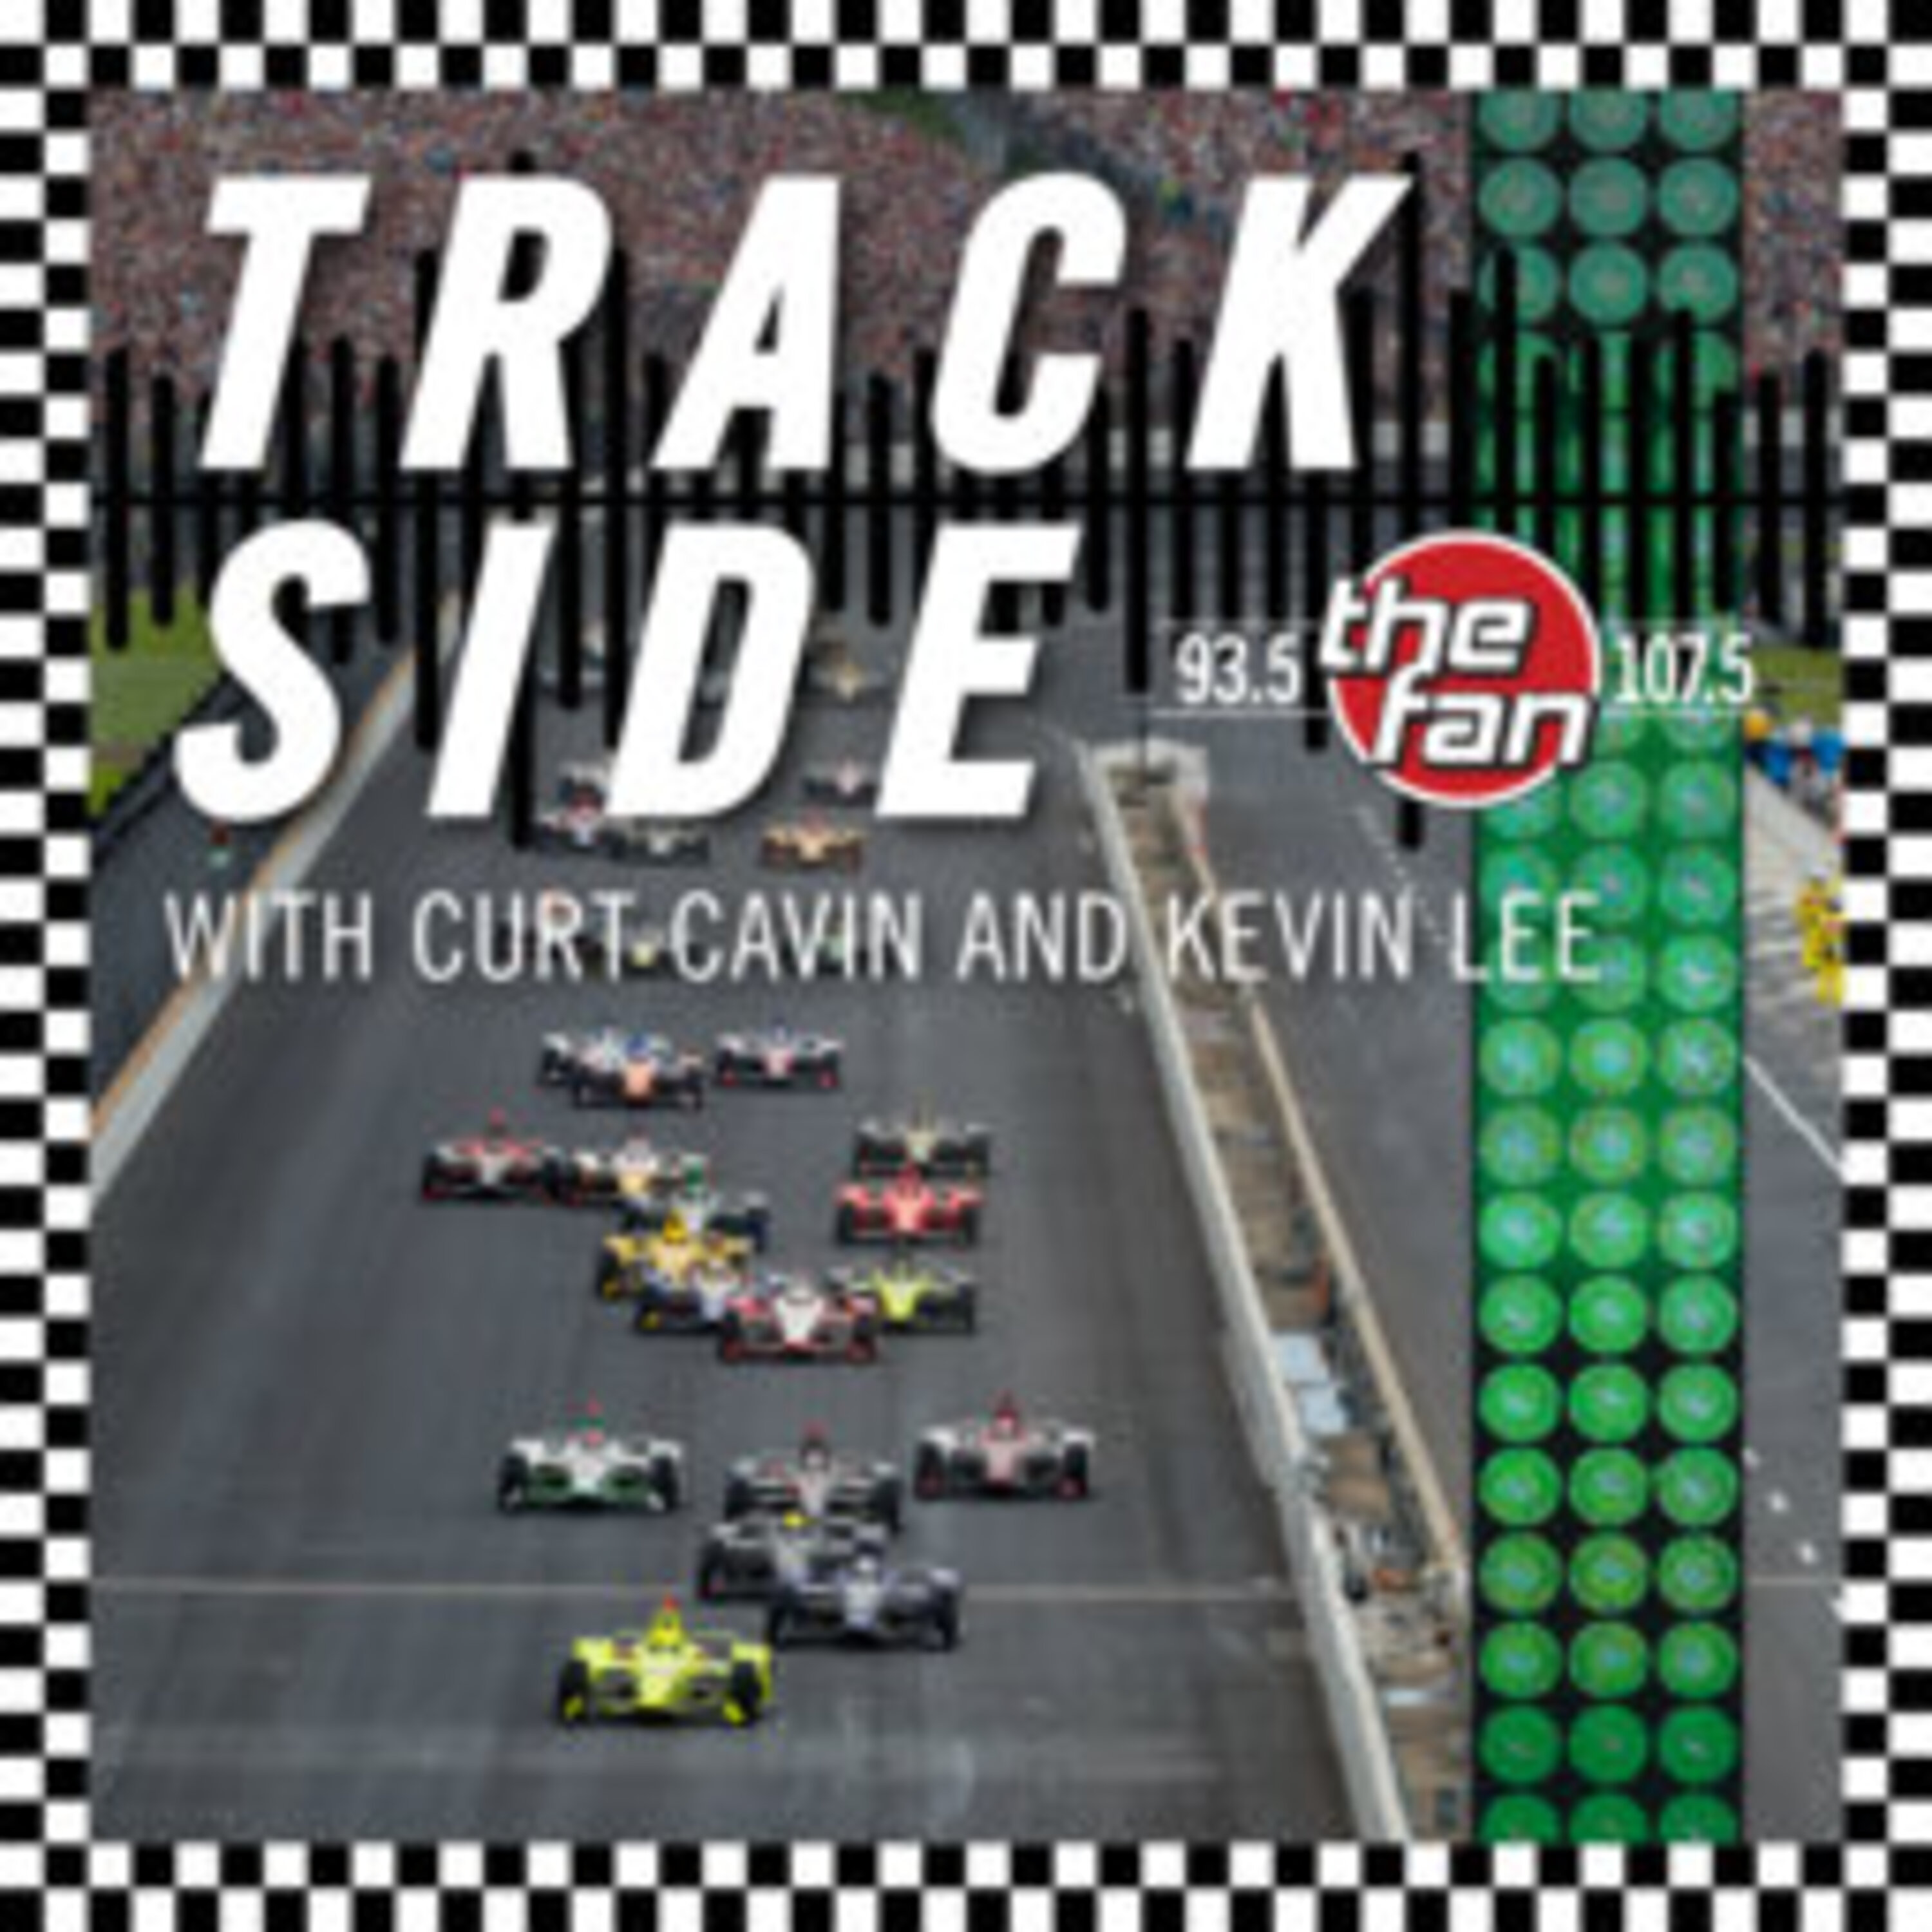 Curt and Kevin recap Thermal, what could change, Indy 500 driver predictions, and more!